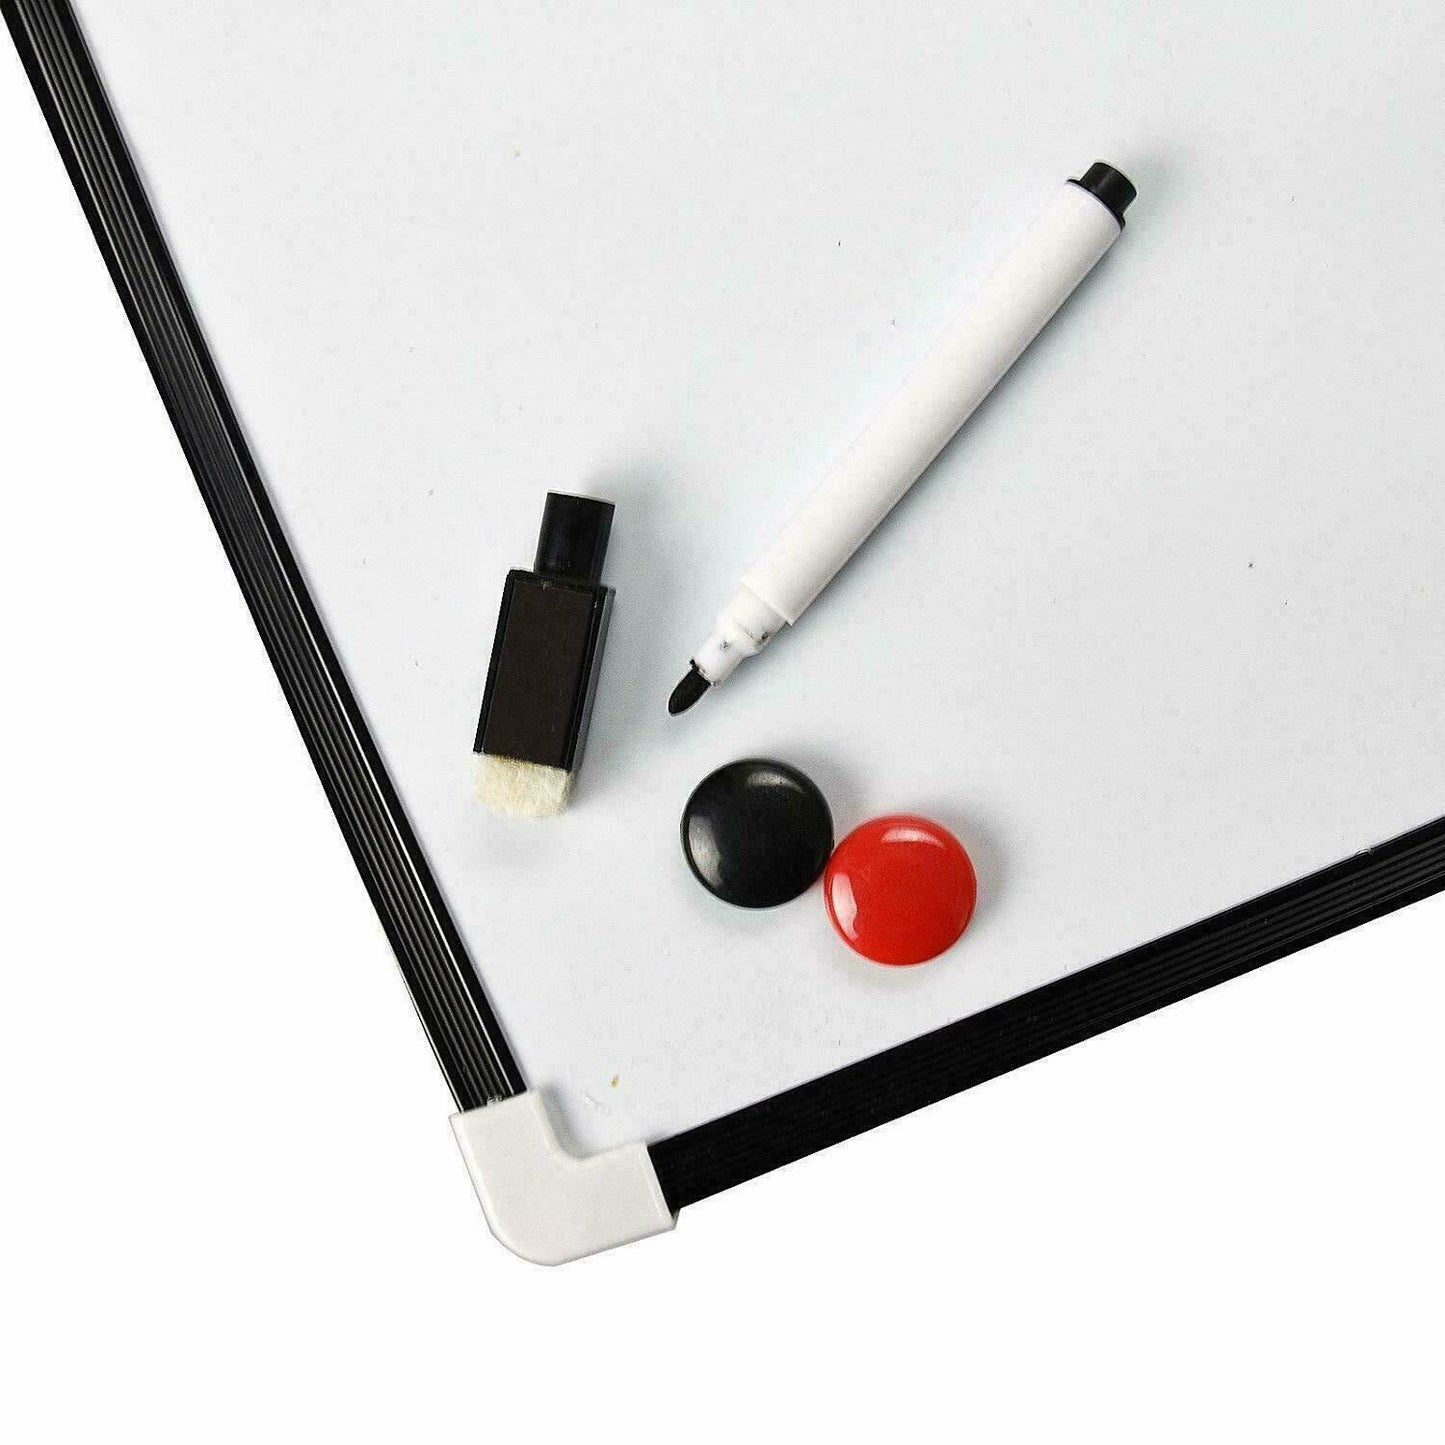 A4 Dry Wipe Magnetic Mini Office Whiteboard Notice Memo White Board Pen & Eraser - ZYBUX